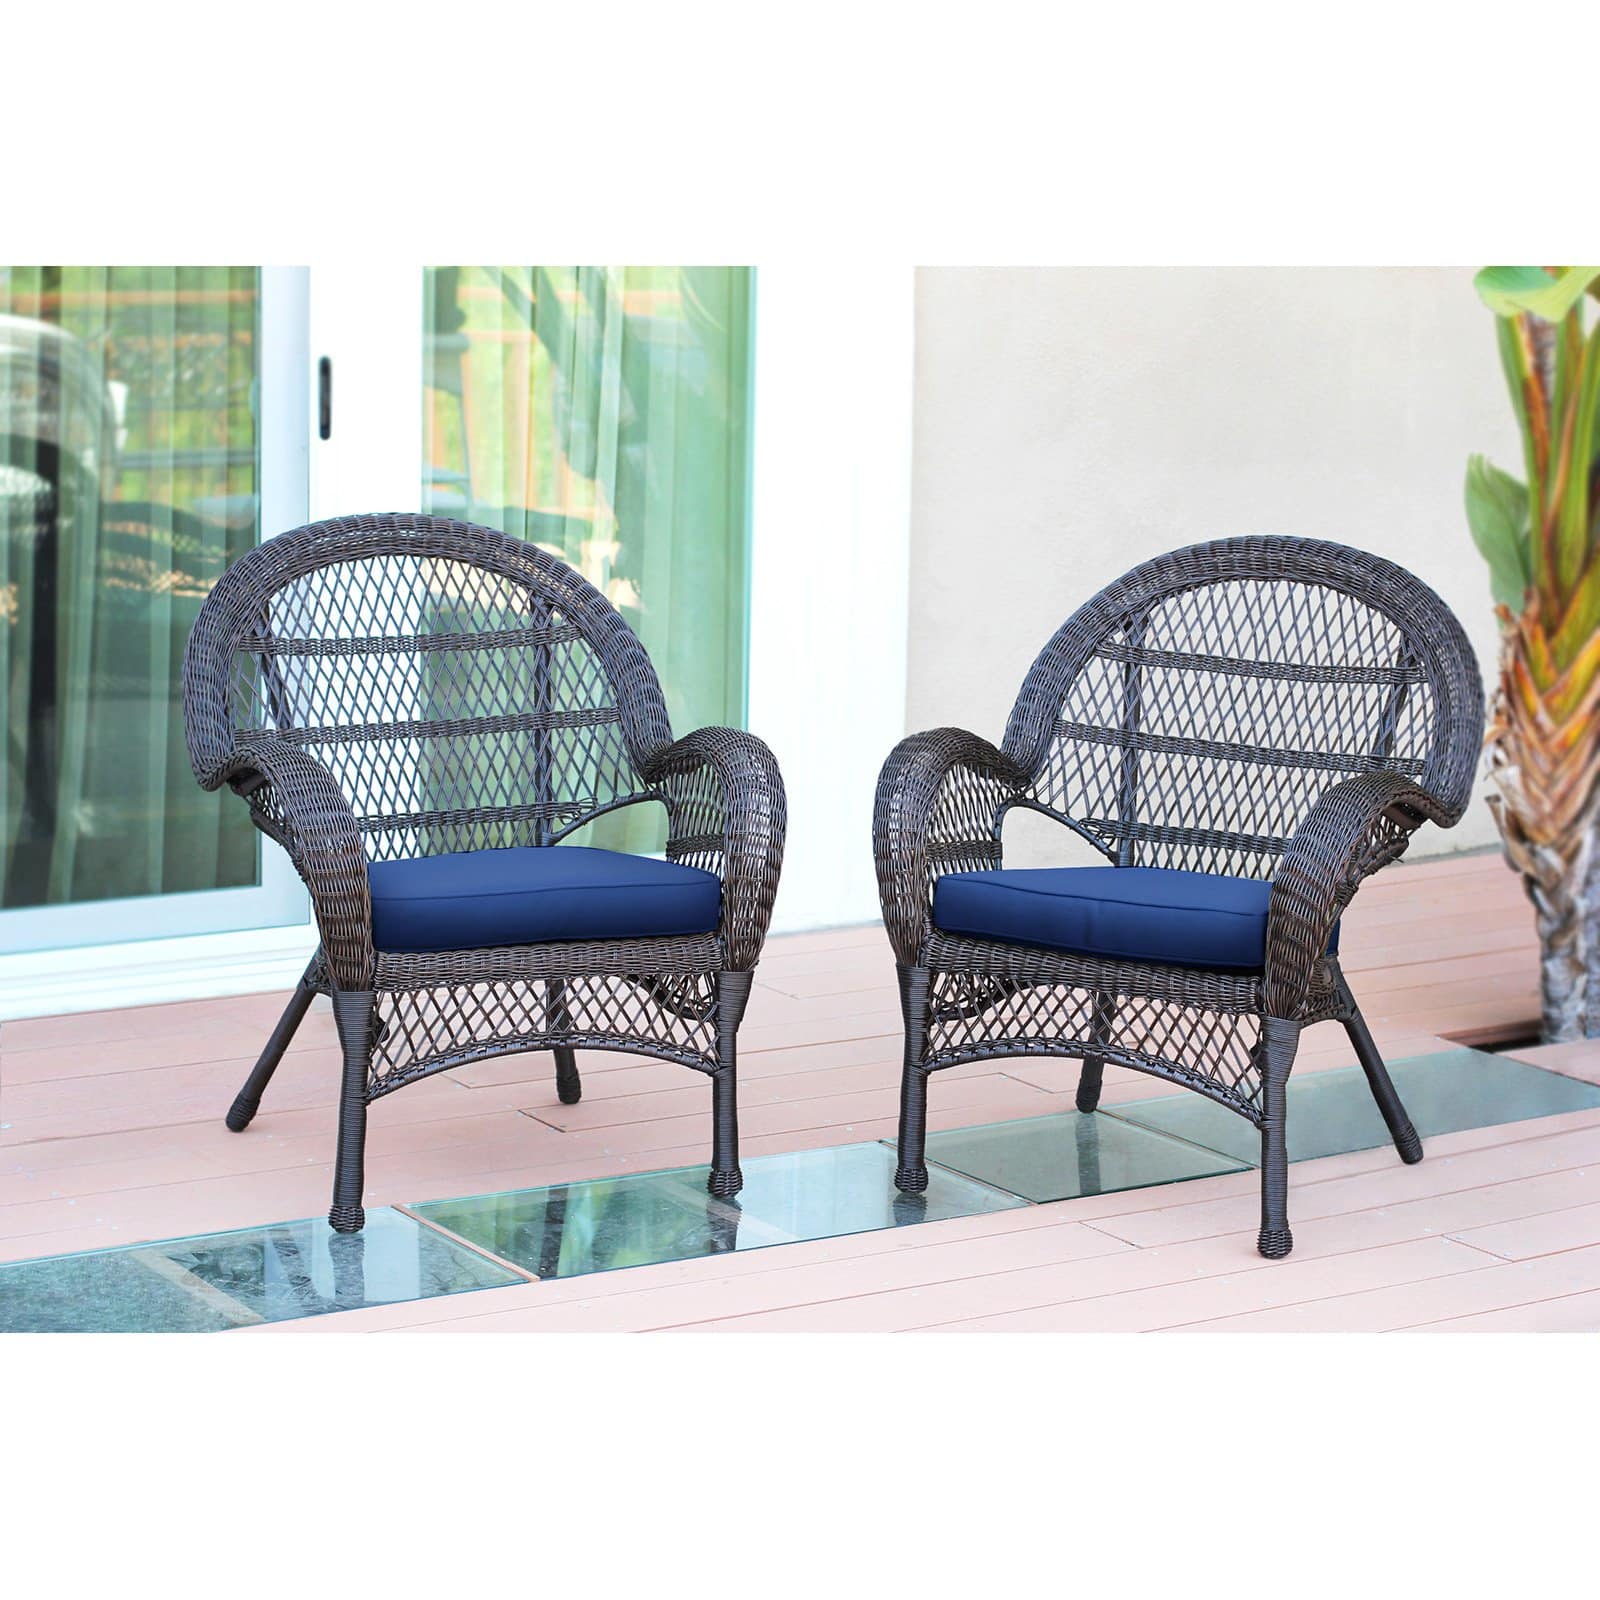 Jeco Wicker Chair in Espresso with Green Cushion (Set of 2) - image 3 of 11